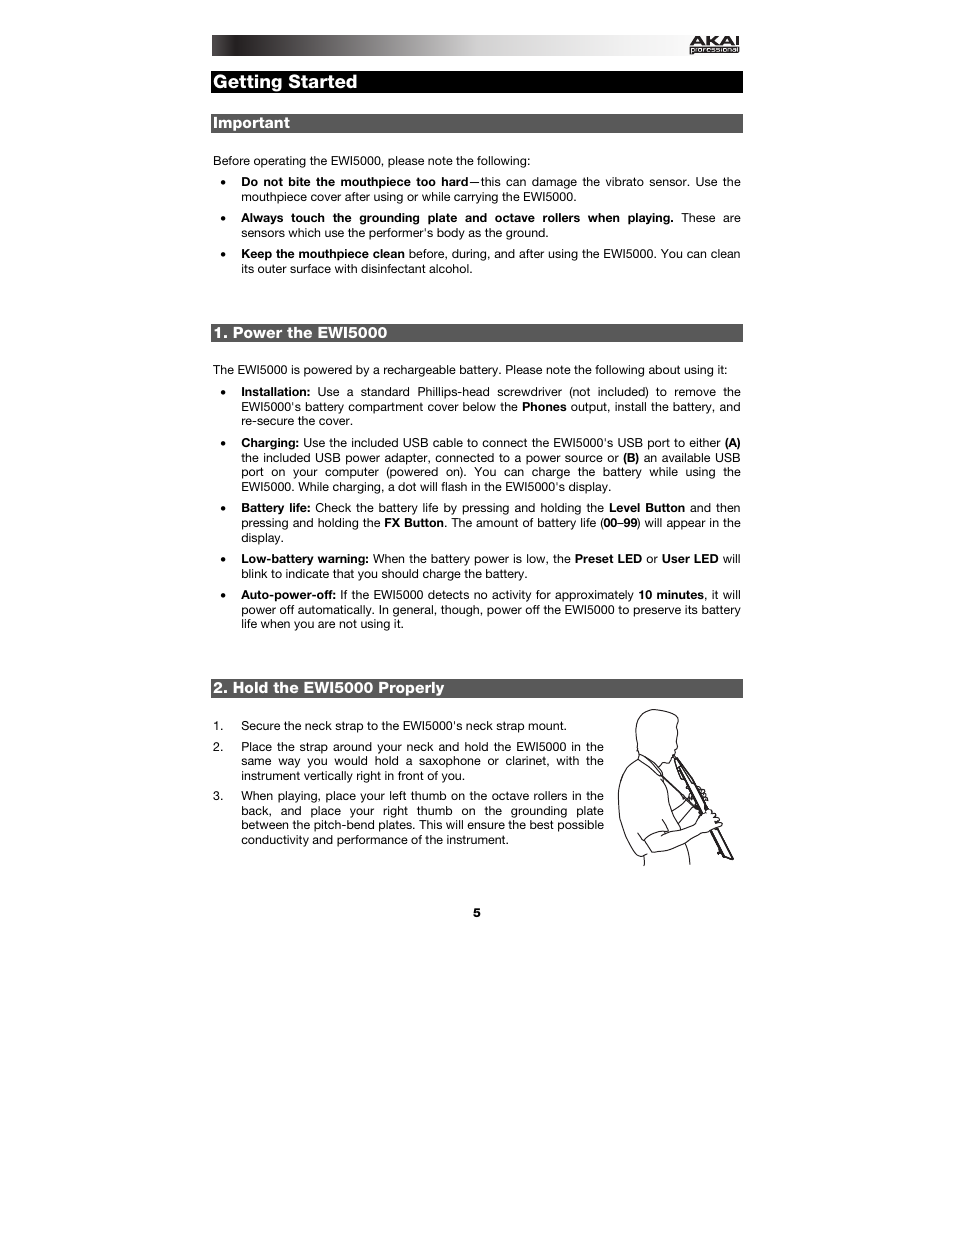 Getting started, Important, Power the ewi5000 | Akai EWI5000 User Manual |  Page 5 / 49